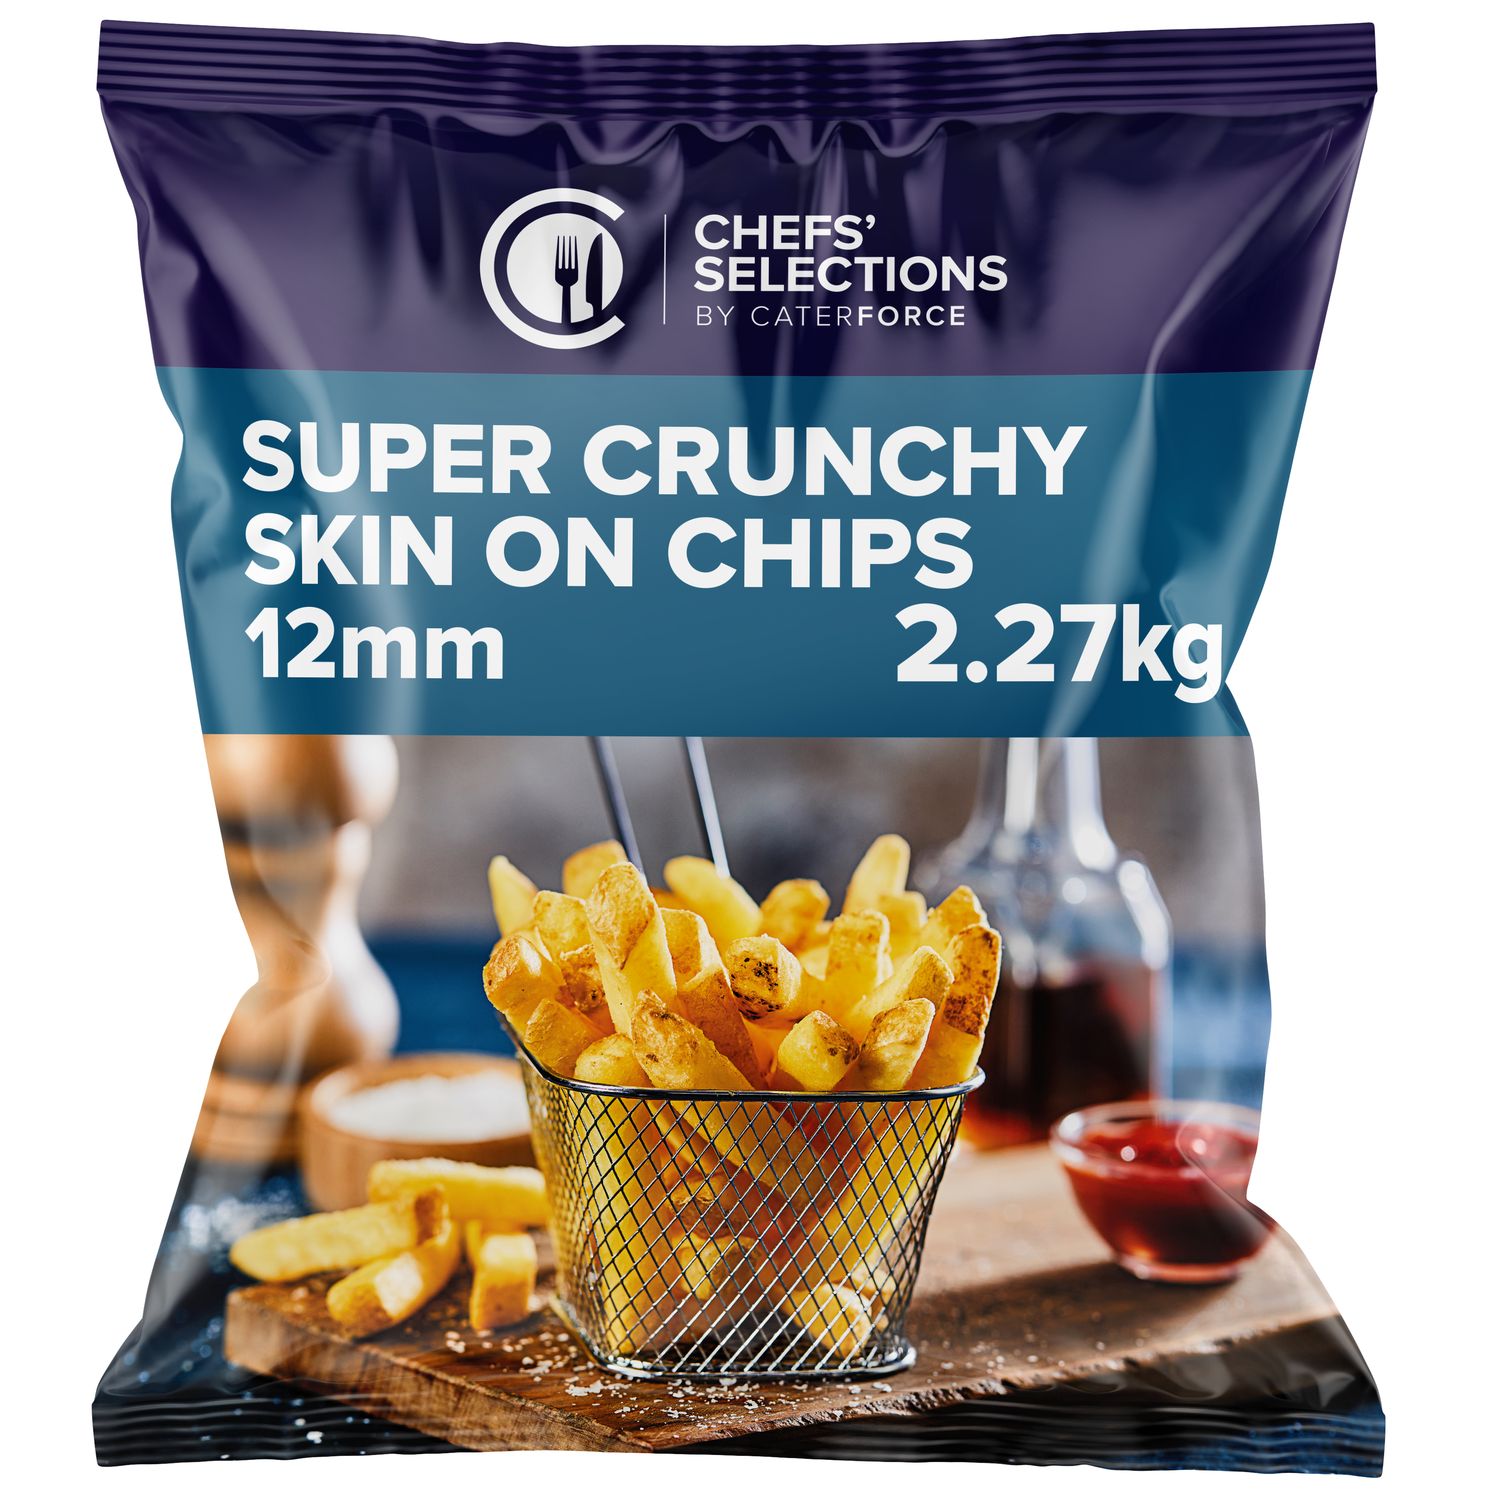 Chefs’ Selections Super Crunchy Skin-on Chips 12mm (4 x 2.27kg)